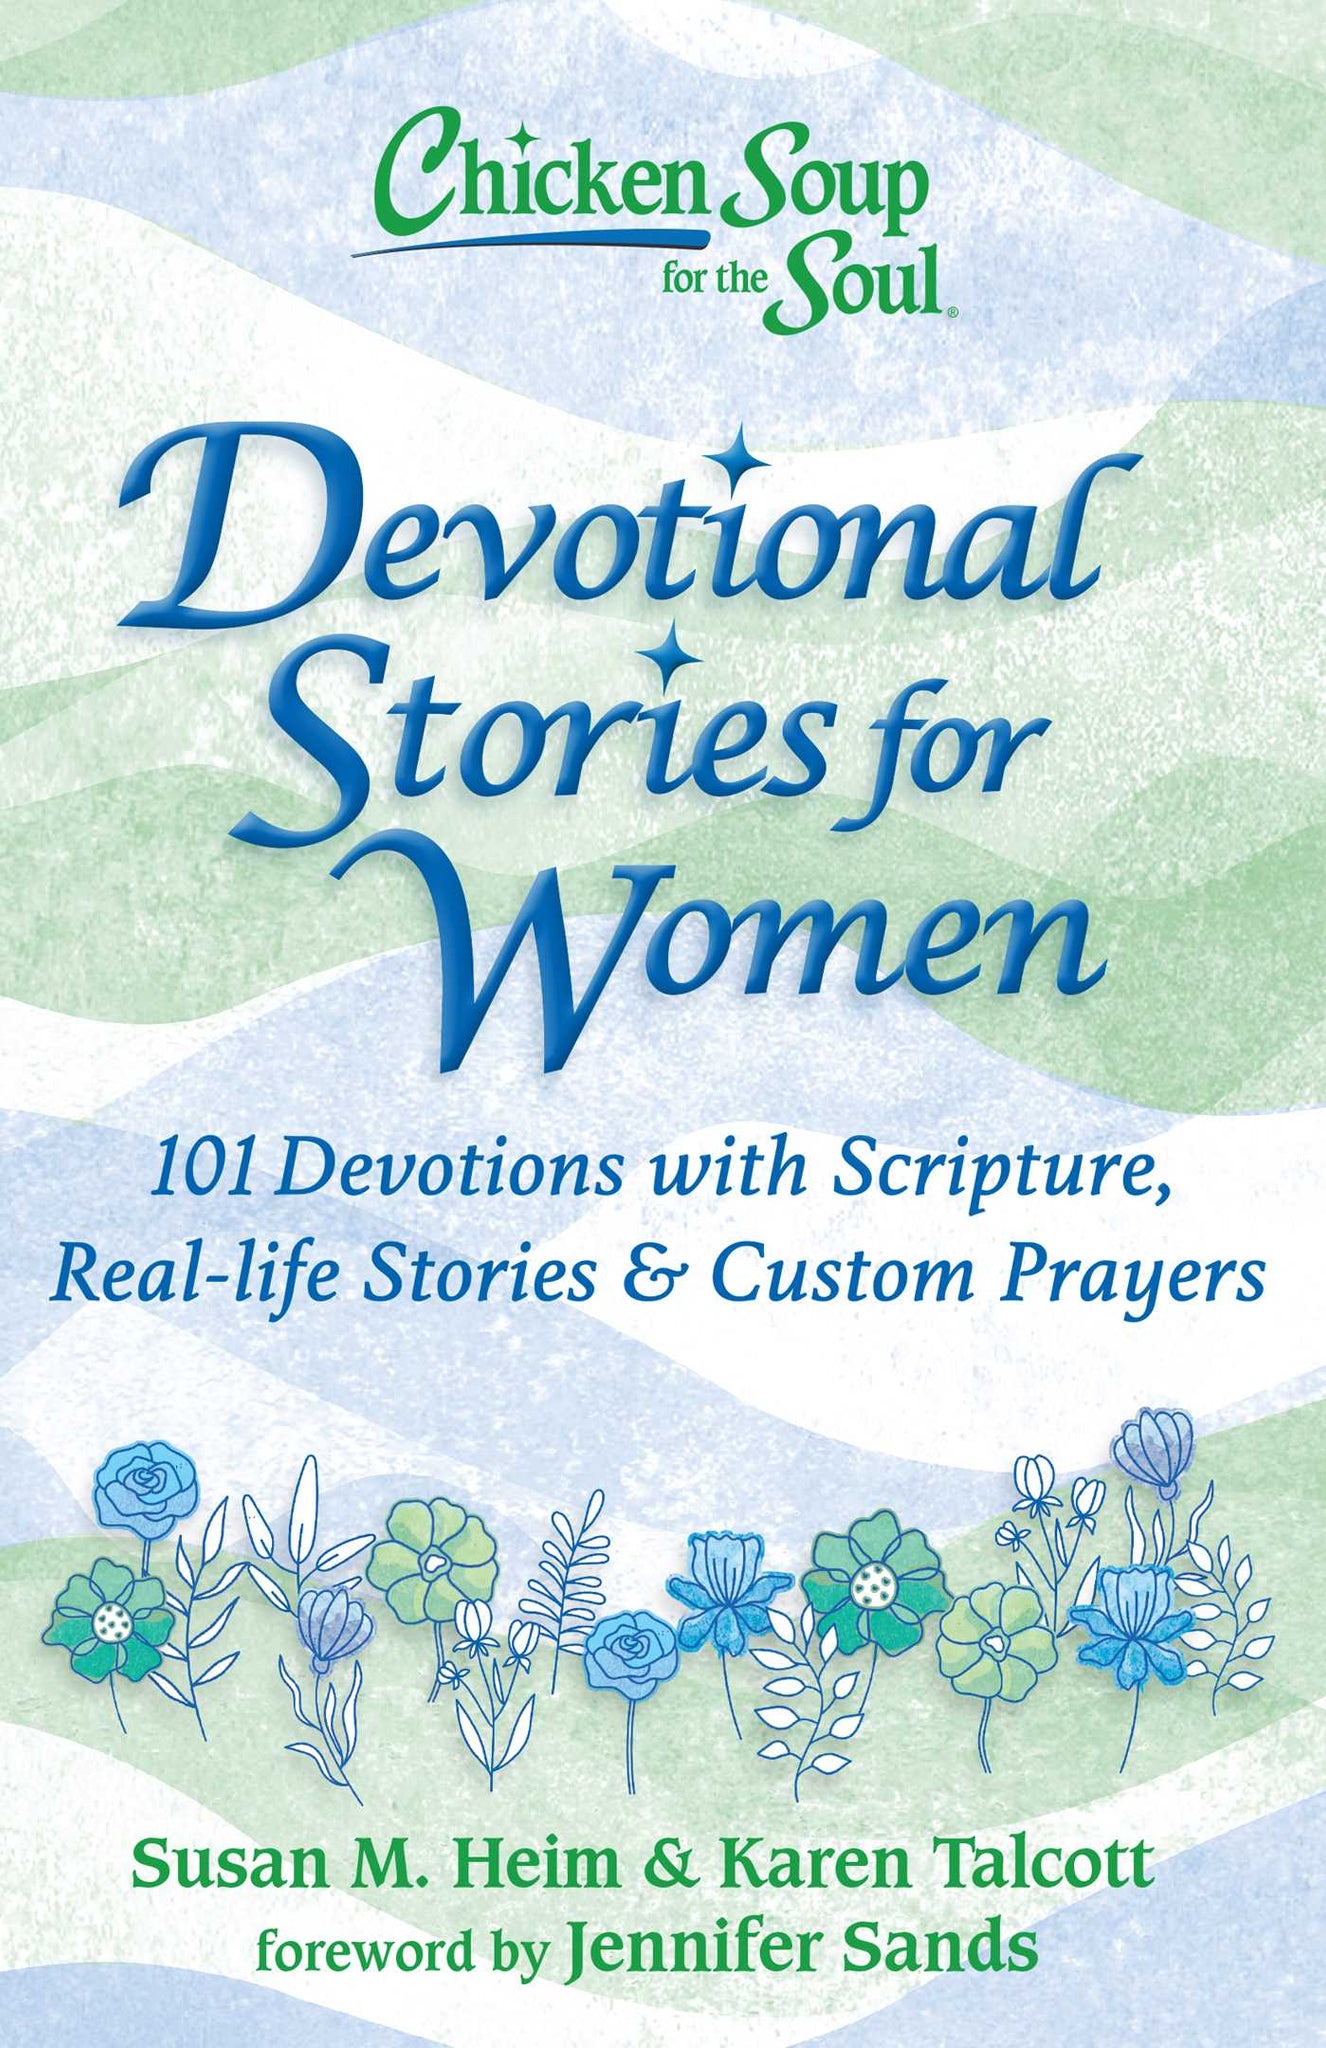 Chicken Soup for the Soul: Devotional Stories for Women : 101 Devotions with Scripture, Real-life Stories & Custom Prayers